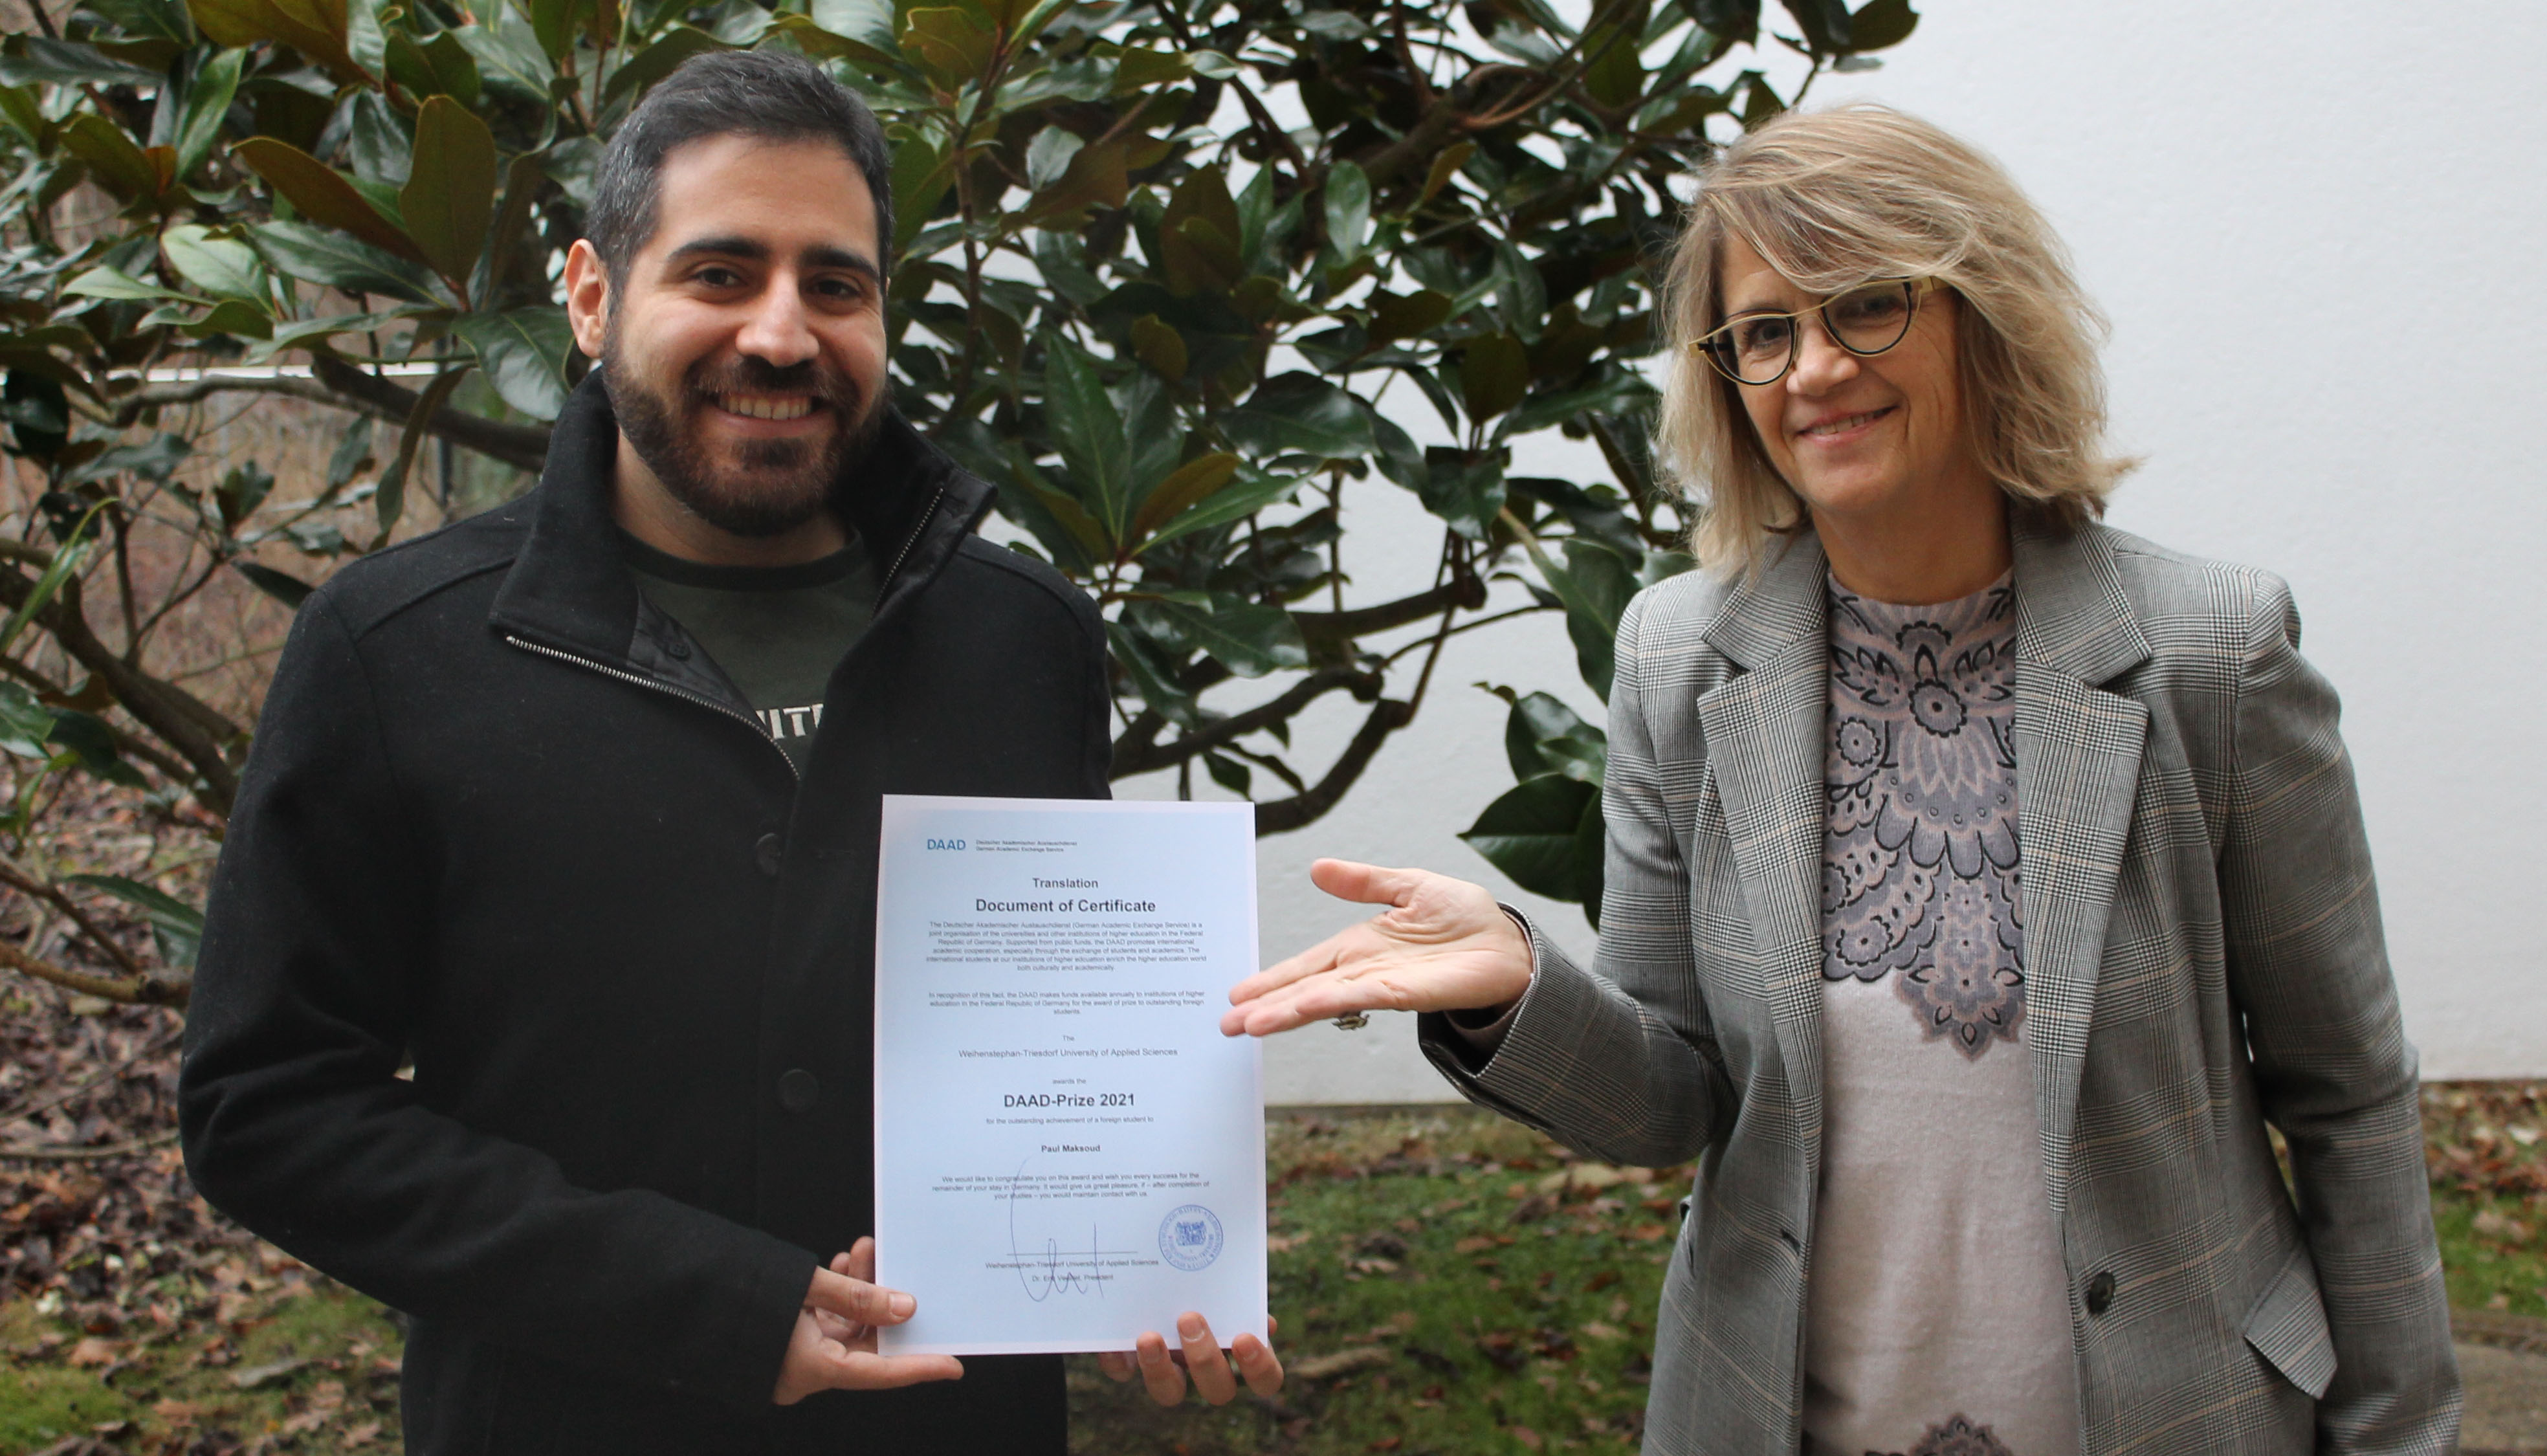 Photo in the garden, background shrub. Paul Maksoud with certificate (left in picture), Prof. Ingrid Schegk (right in picture).